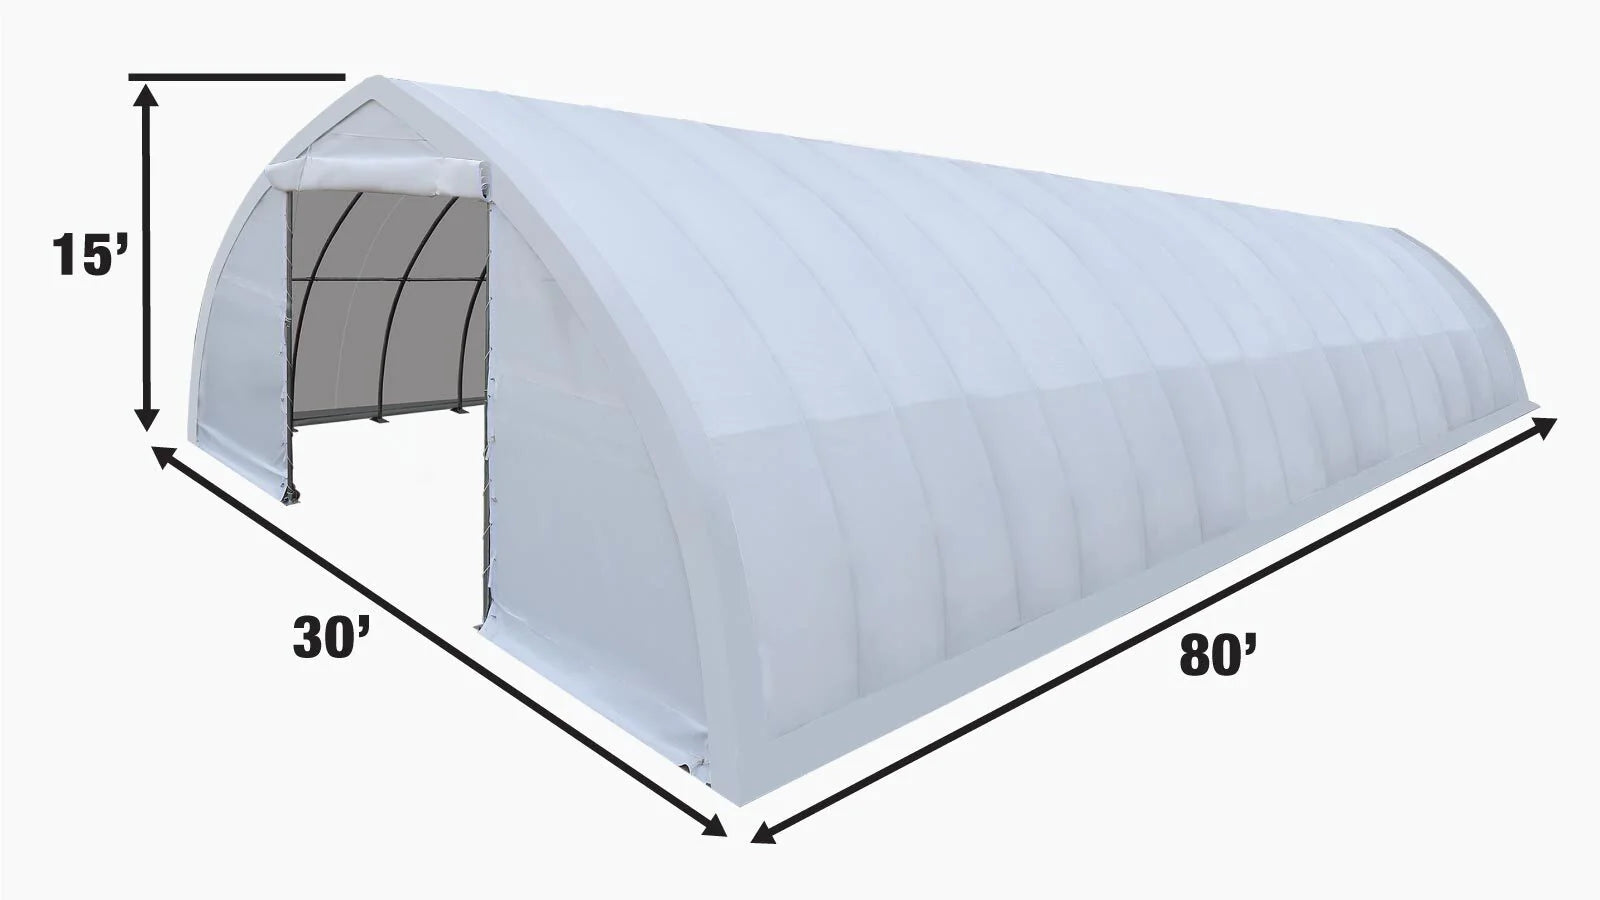 TMG Industrial 30' x 80' Peak Ceiling Storage Shelter with Heavy Duty 11 oz PE Cover & Drive Through Doors, TMG-ST3080E (Previously ST3080)-specifications-image